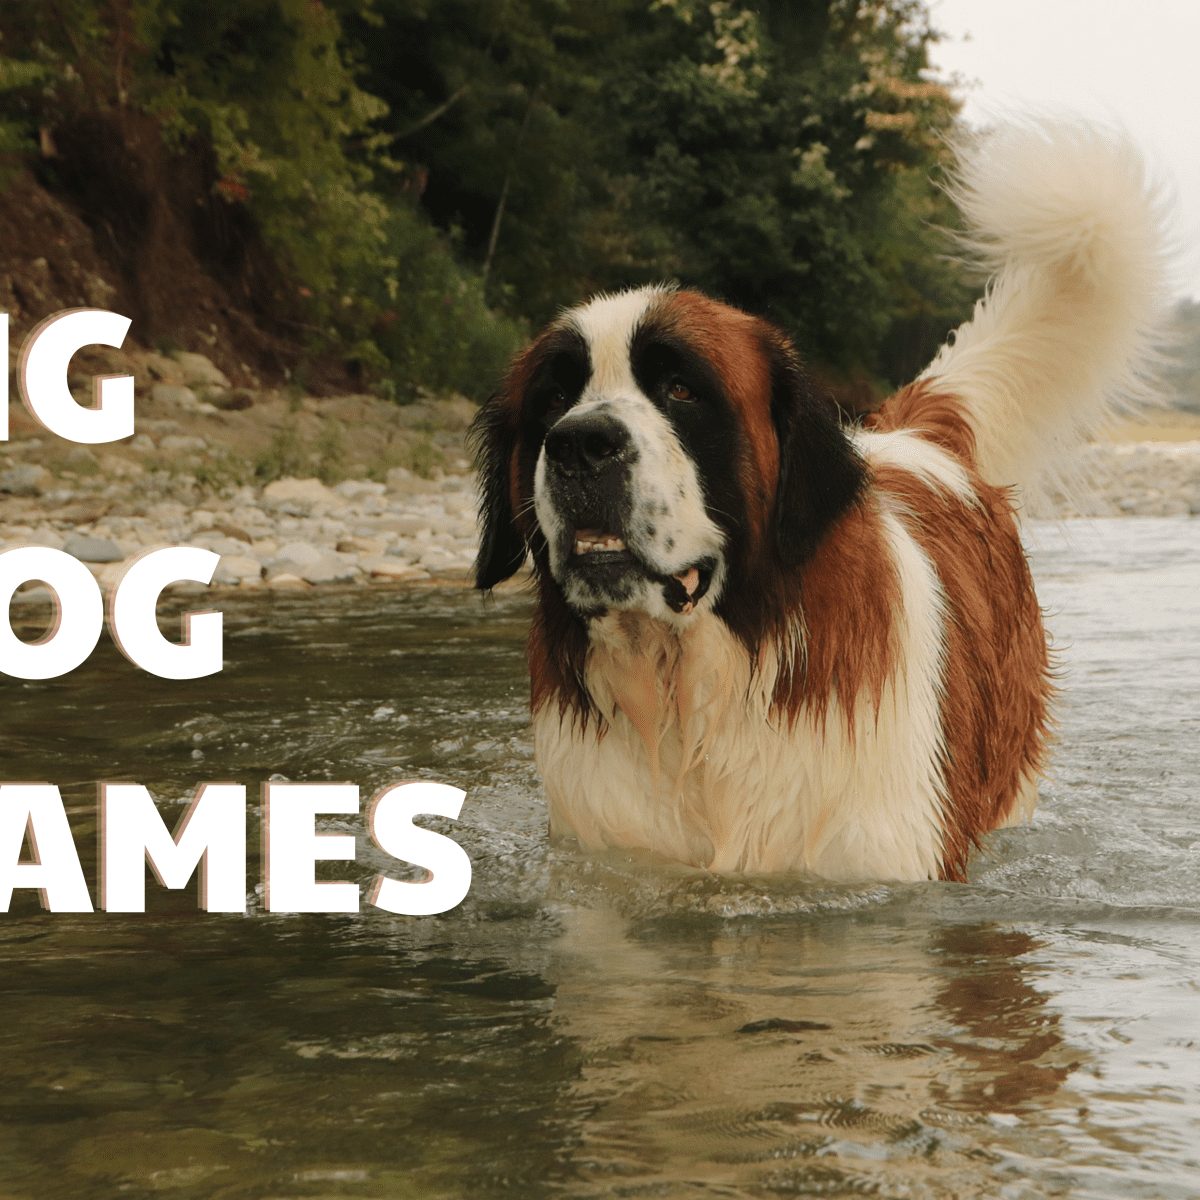 300+ Big Dog Names (With Meanings) - Pethelpful